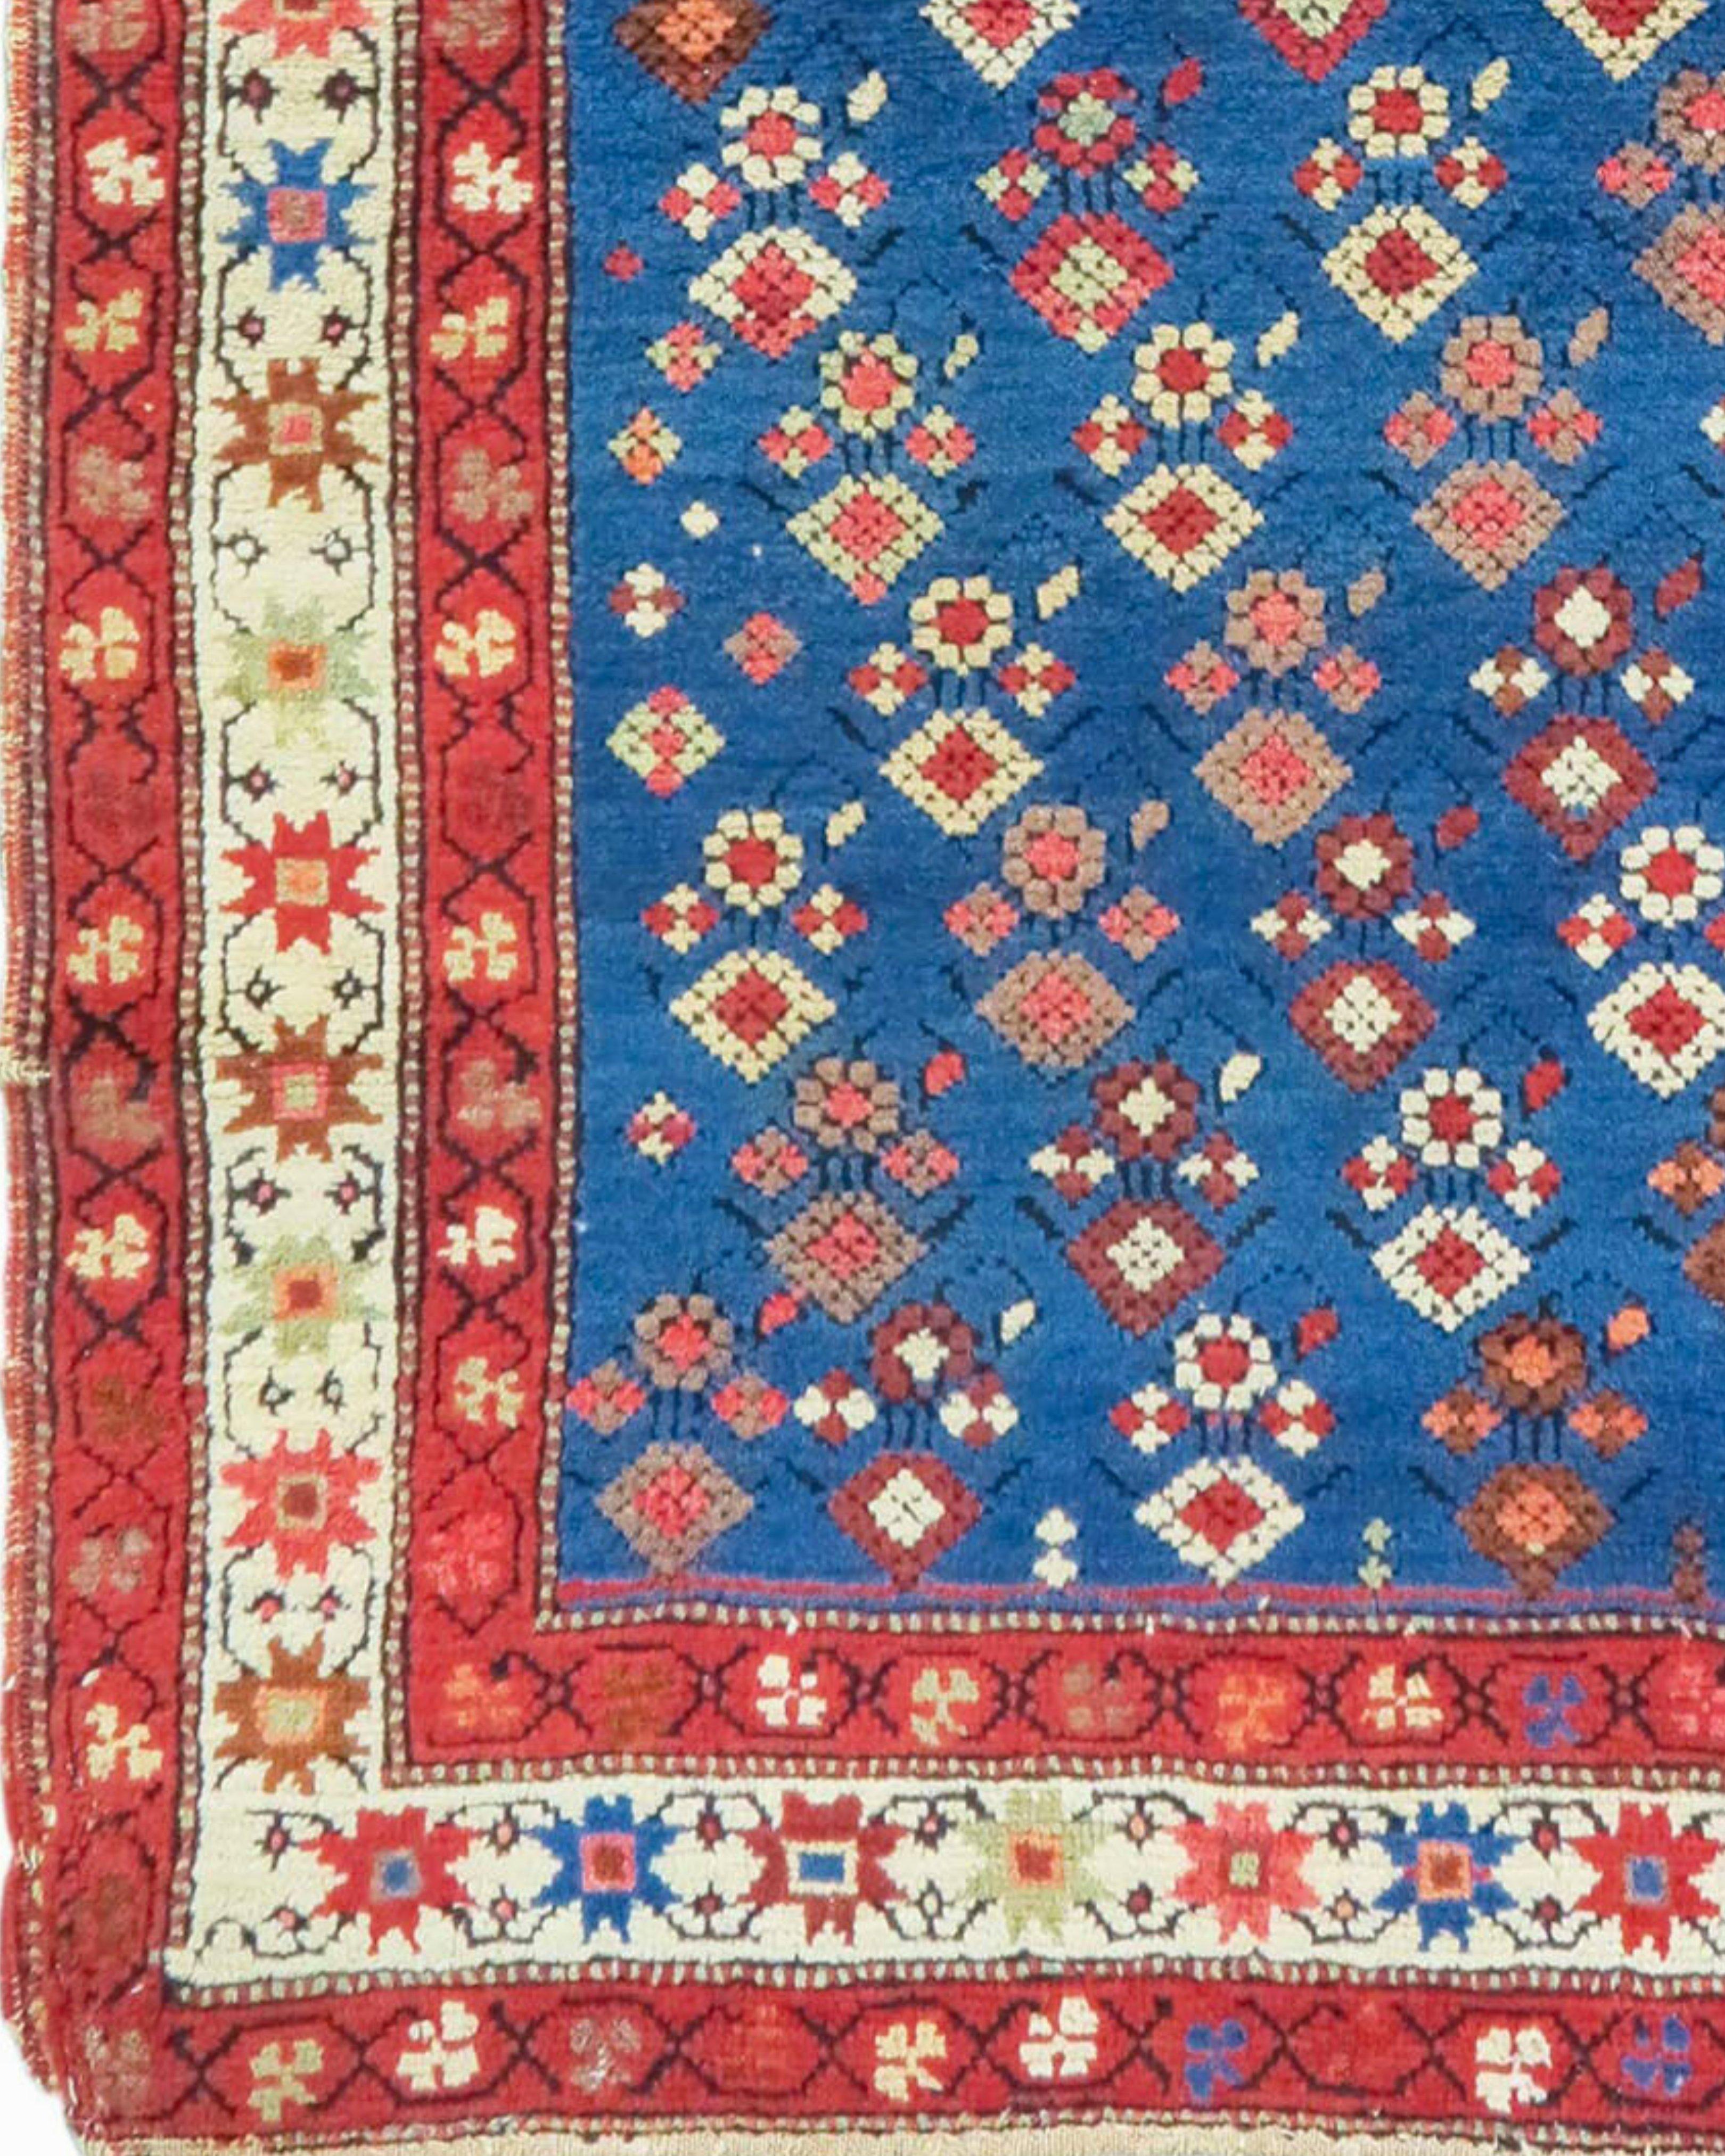 Antique Caucasian Karabagh Prayer Rug, c. 1900 In Excellent Condition For Sale In San Francisco, CA